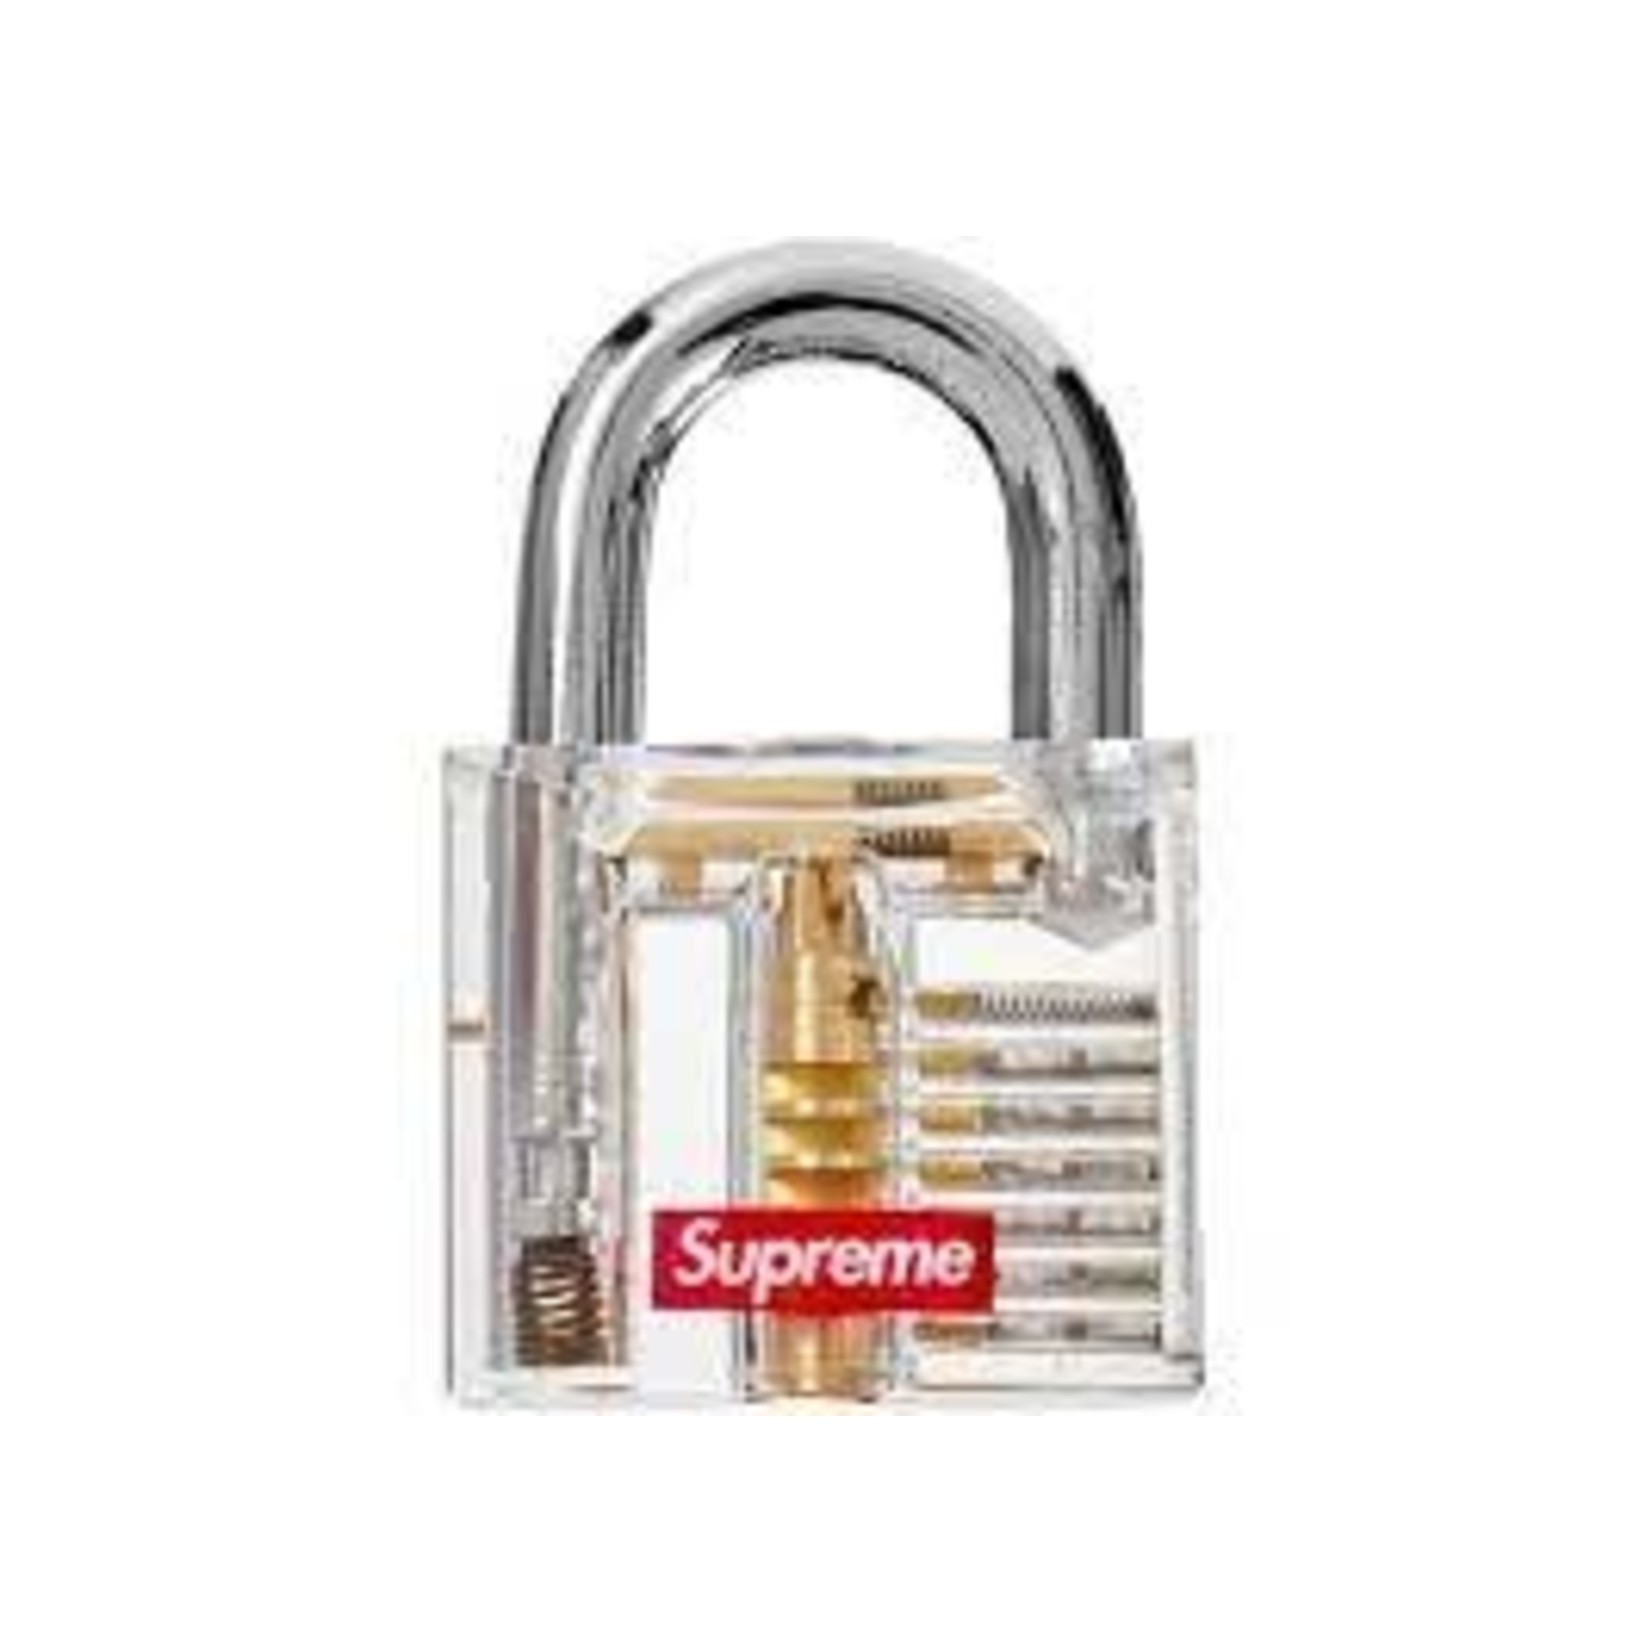 Supreme Supreme Transparant Lock Clear Size OS, DS BRAND NEW